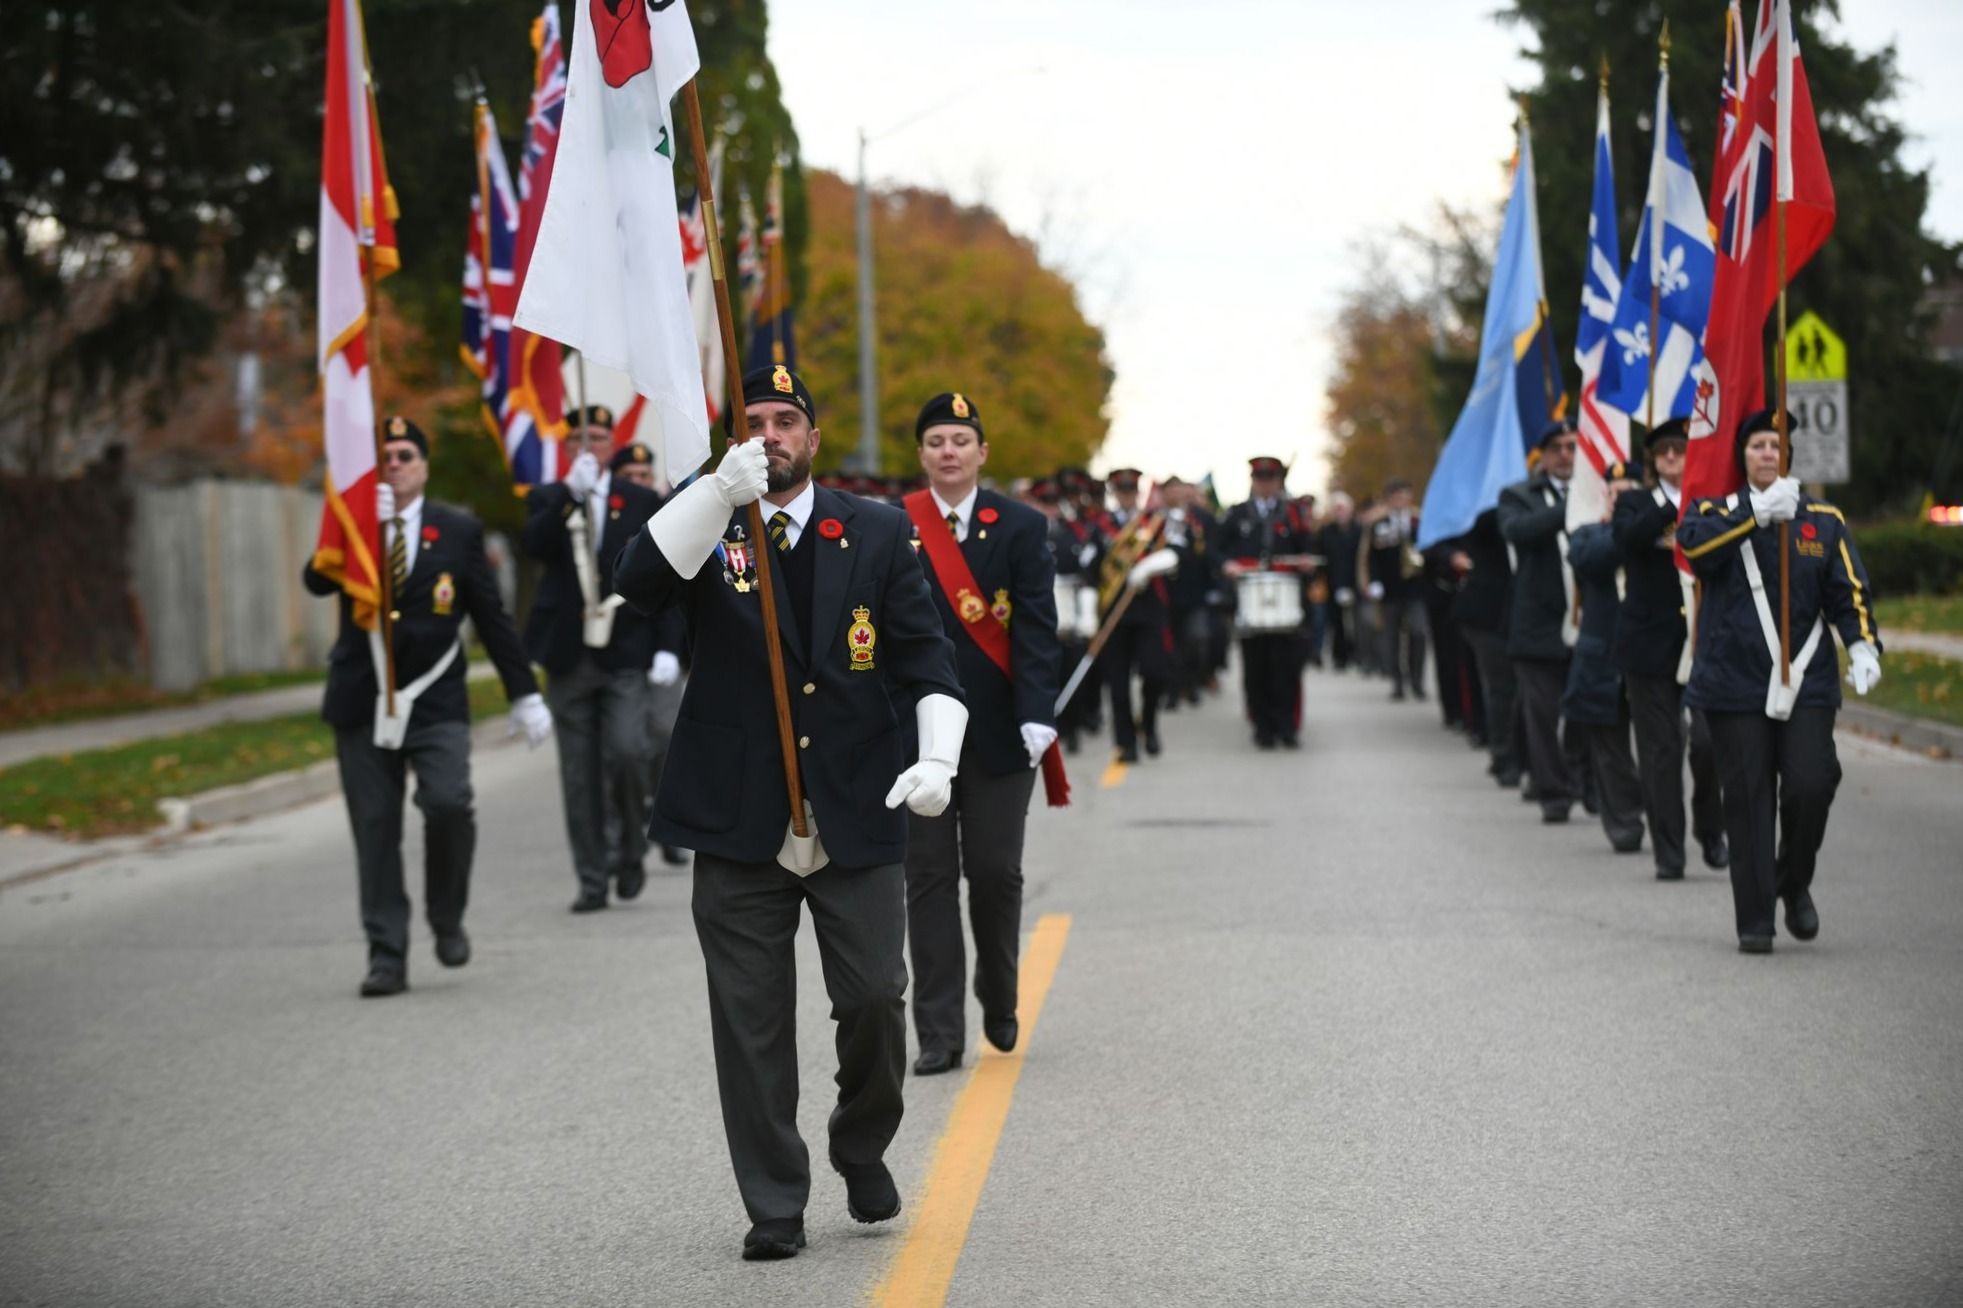                      Remembrance Day parade in Elmira                             
                     